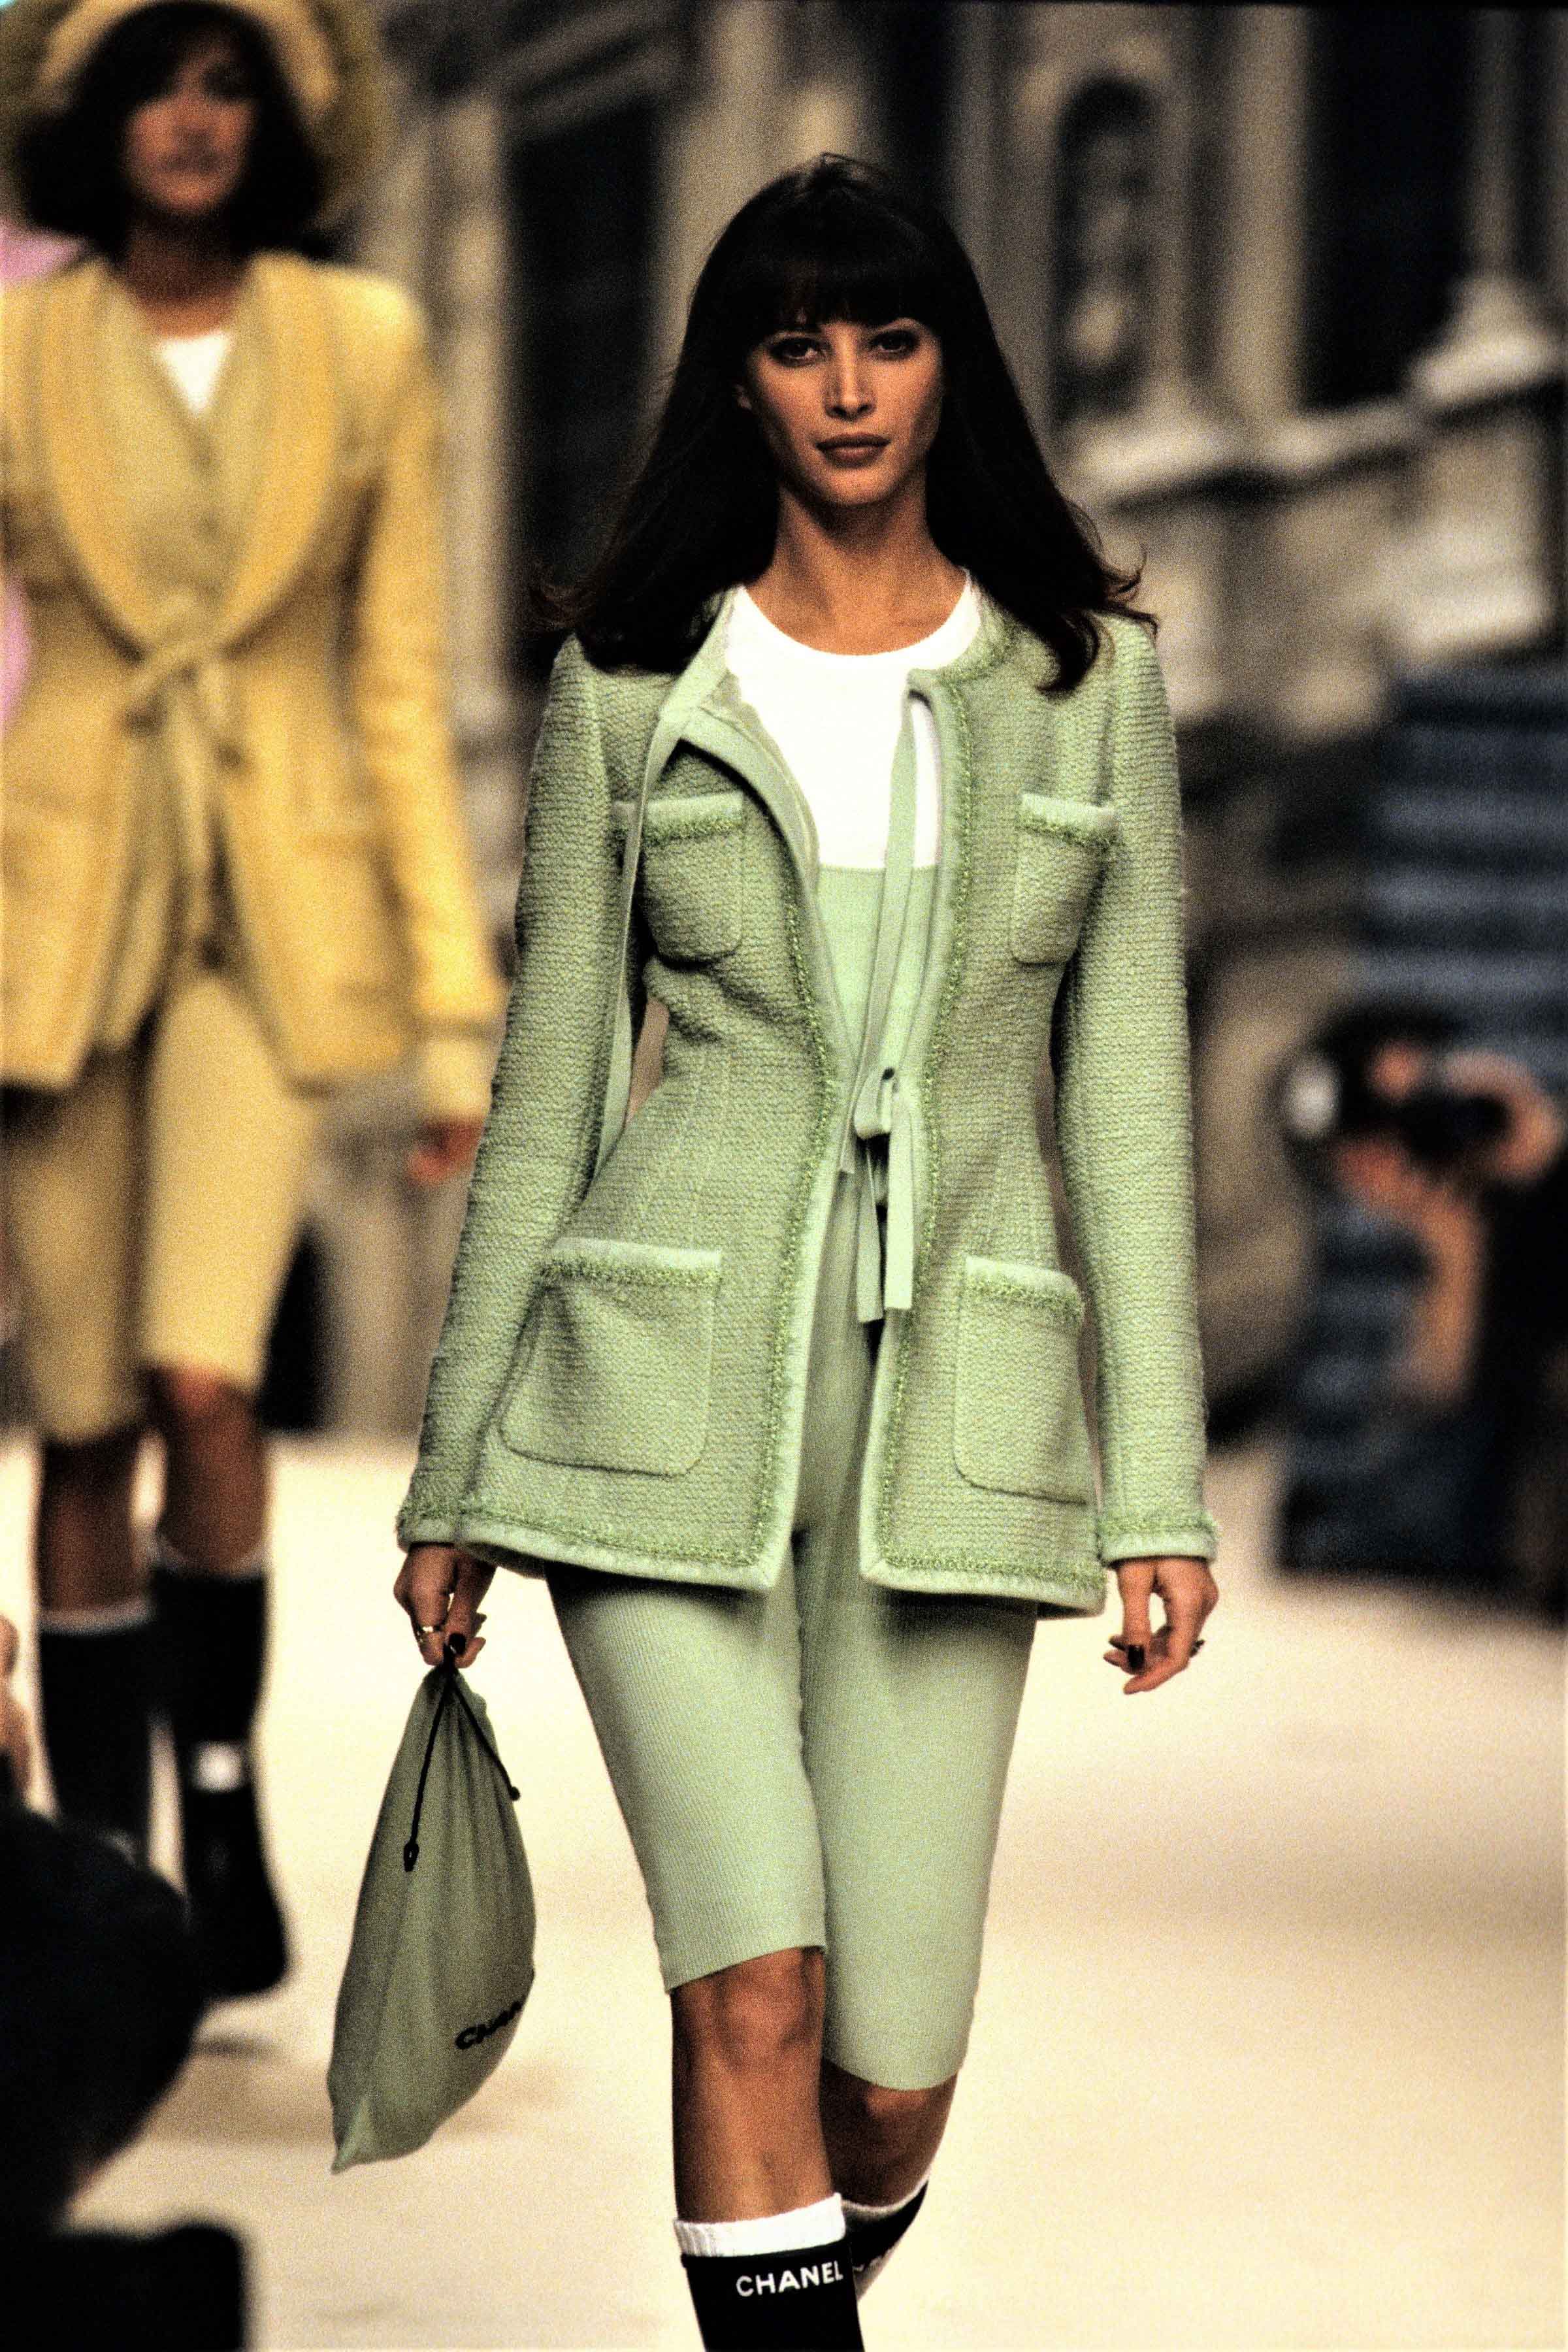 chanel in the 90's -chanel-fall-1994-ready-to-wear-CN10010313-christy-turlington fashion in the 90's